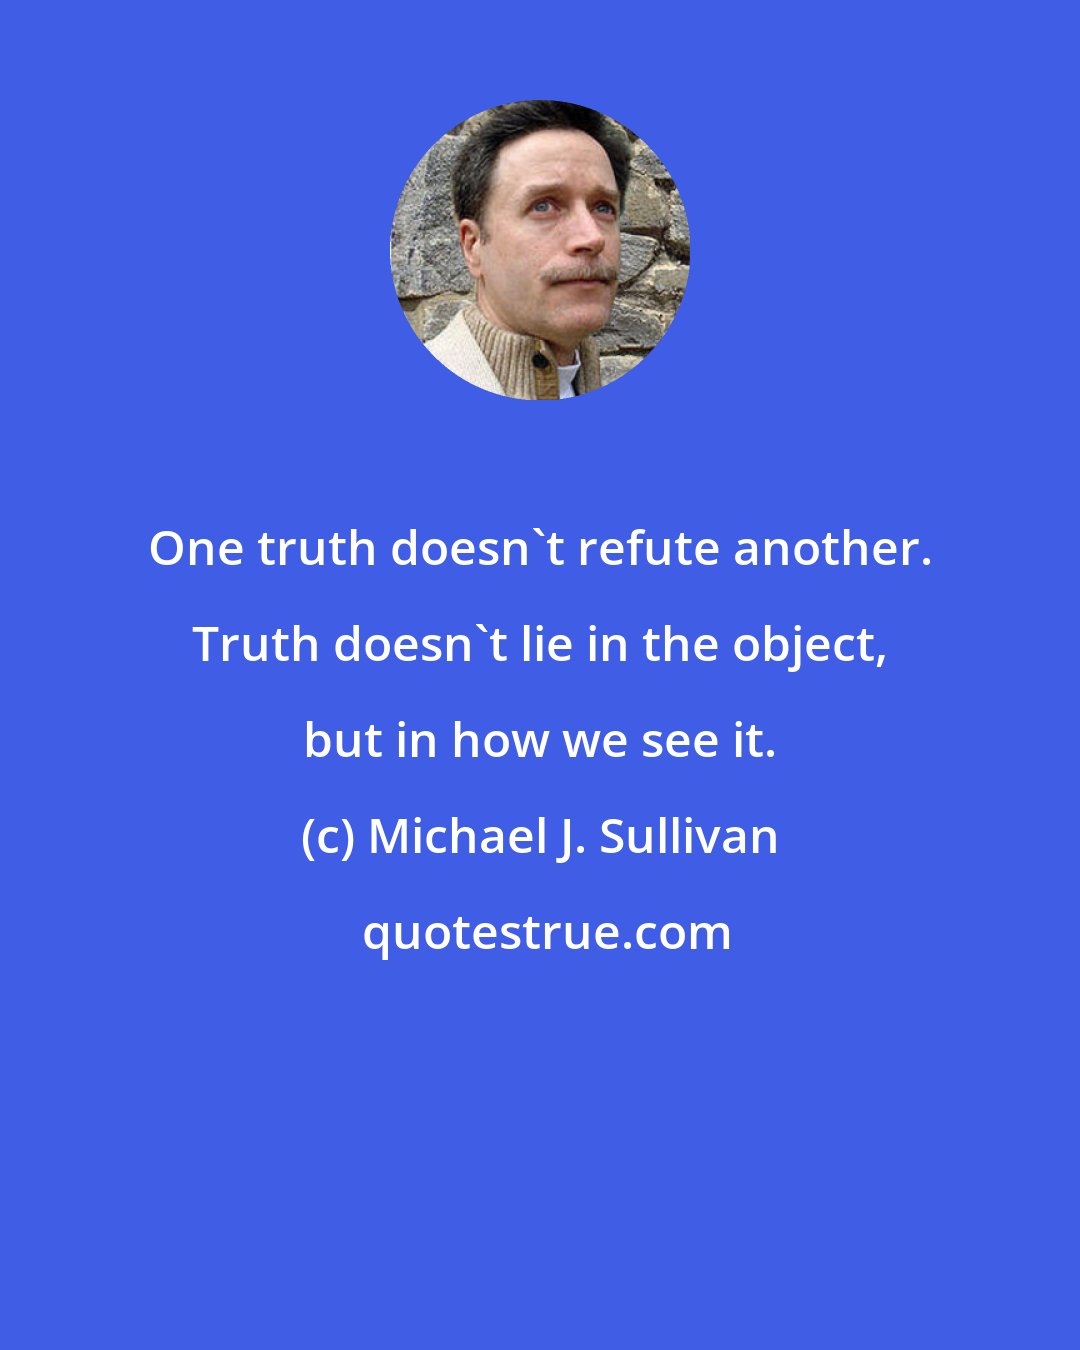 Michael J. Sullivan: One truth doesn't refute another. Truth doesn't lie in the object, but in how we see it.